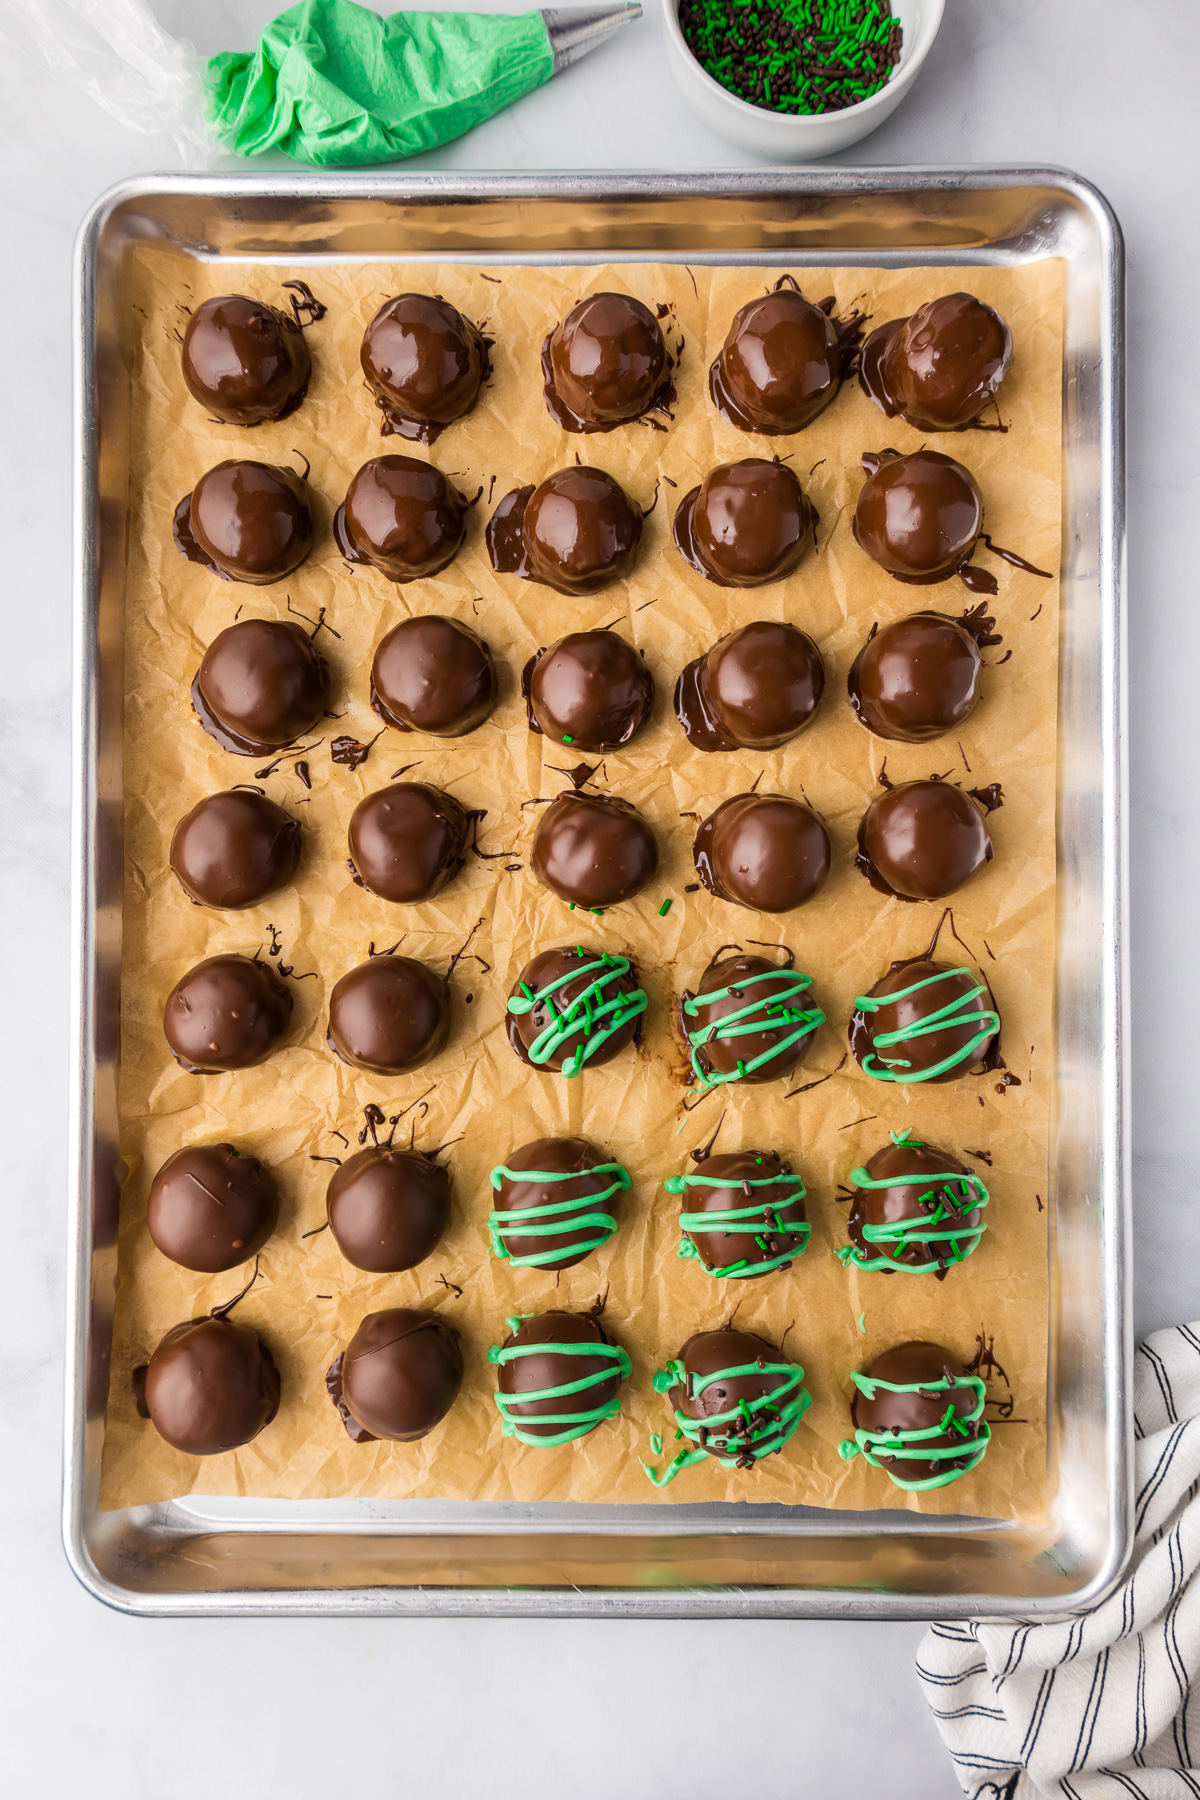 Mint chocolate truffles coated in chocolate on a baking sheet with green chocolate drizzled on top of some truffles.